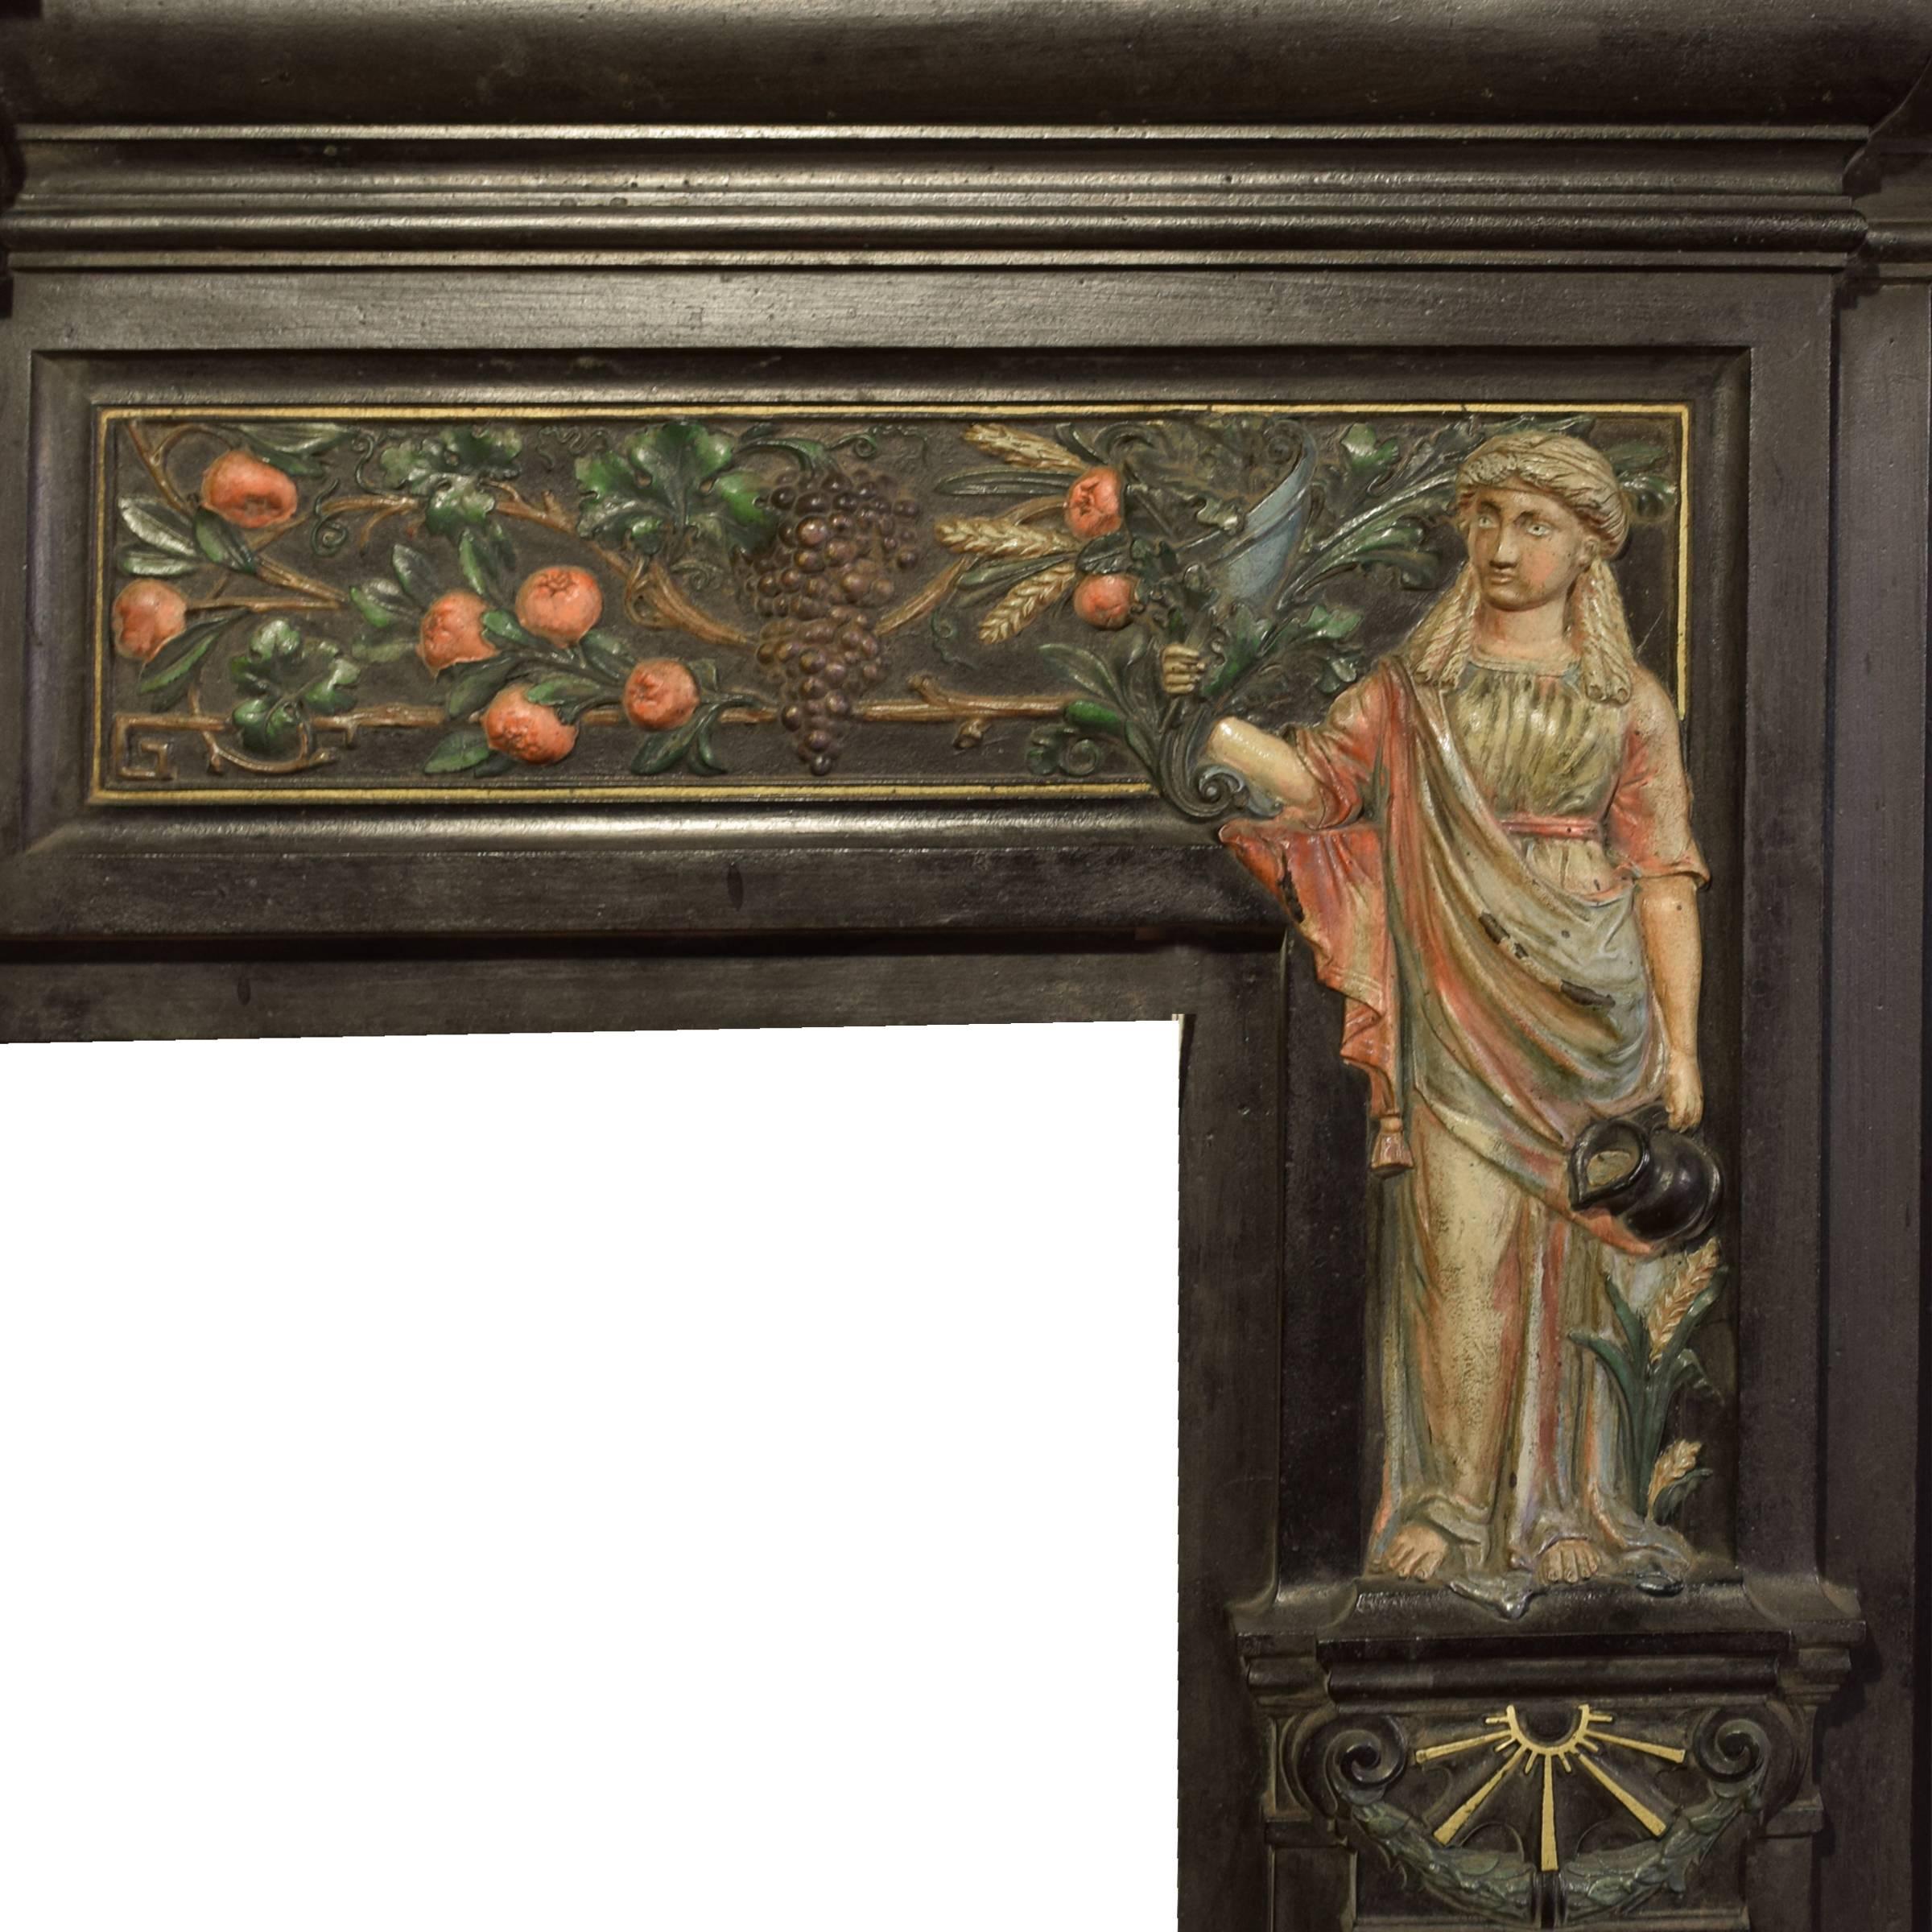 An English polished cast iron fireplace mantel painted to highlight the 'peace and plenty' motif, circa 1880.
Firebox dimensions: 35.75